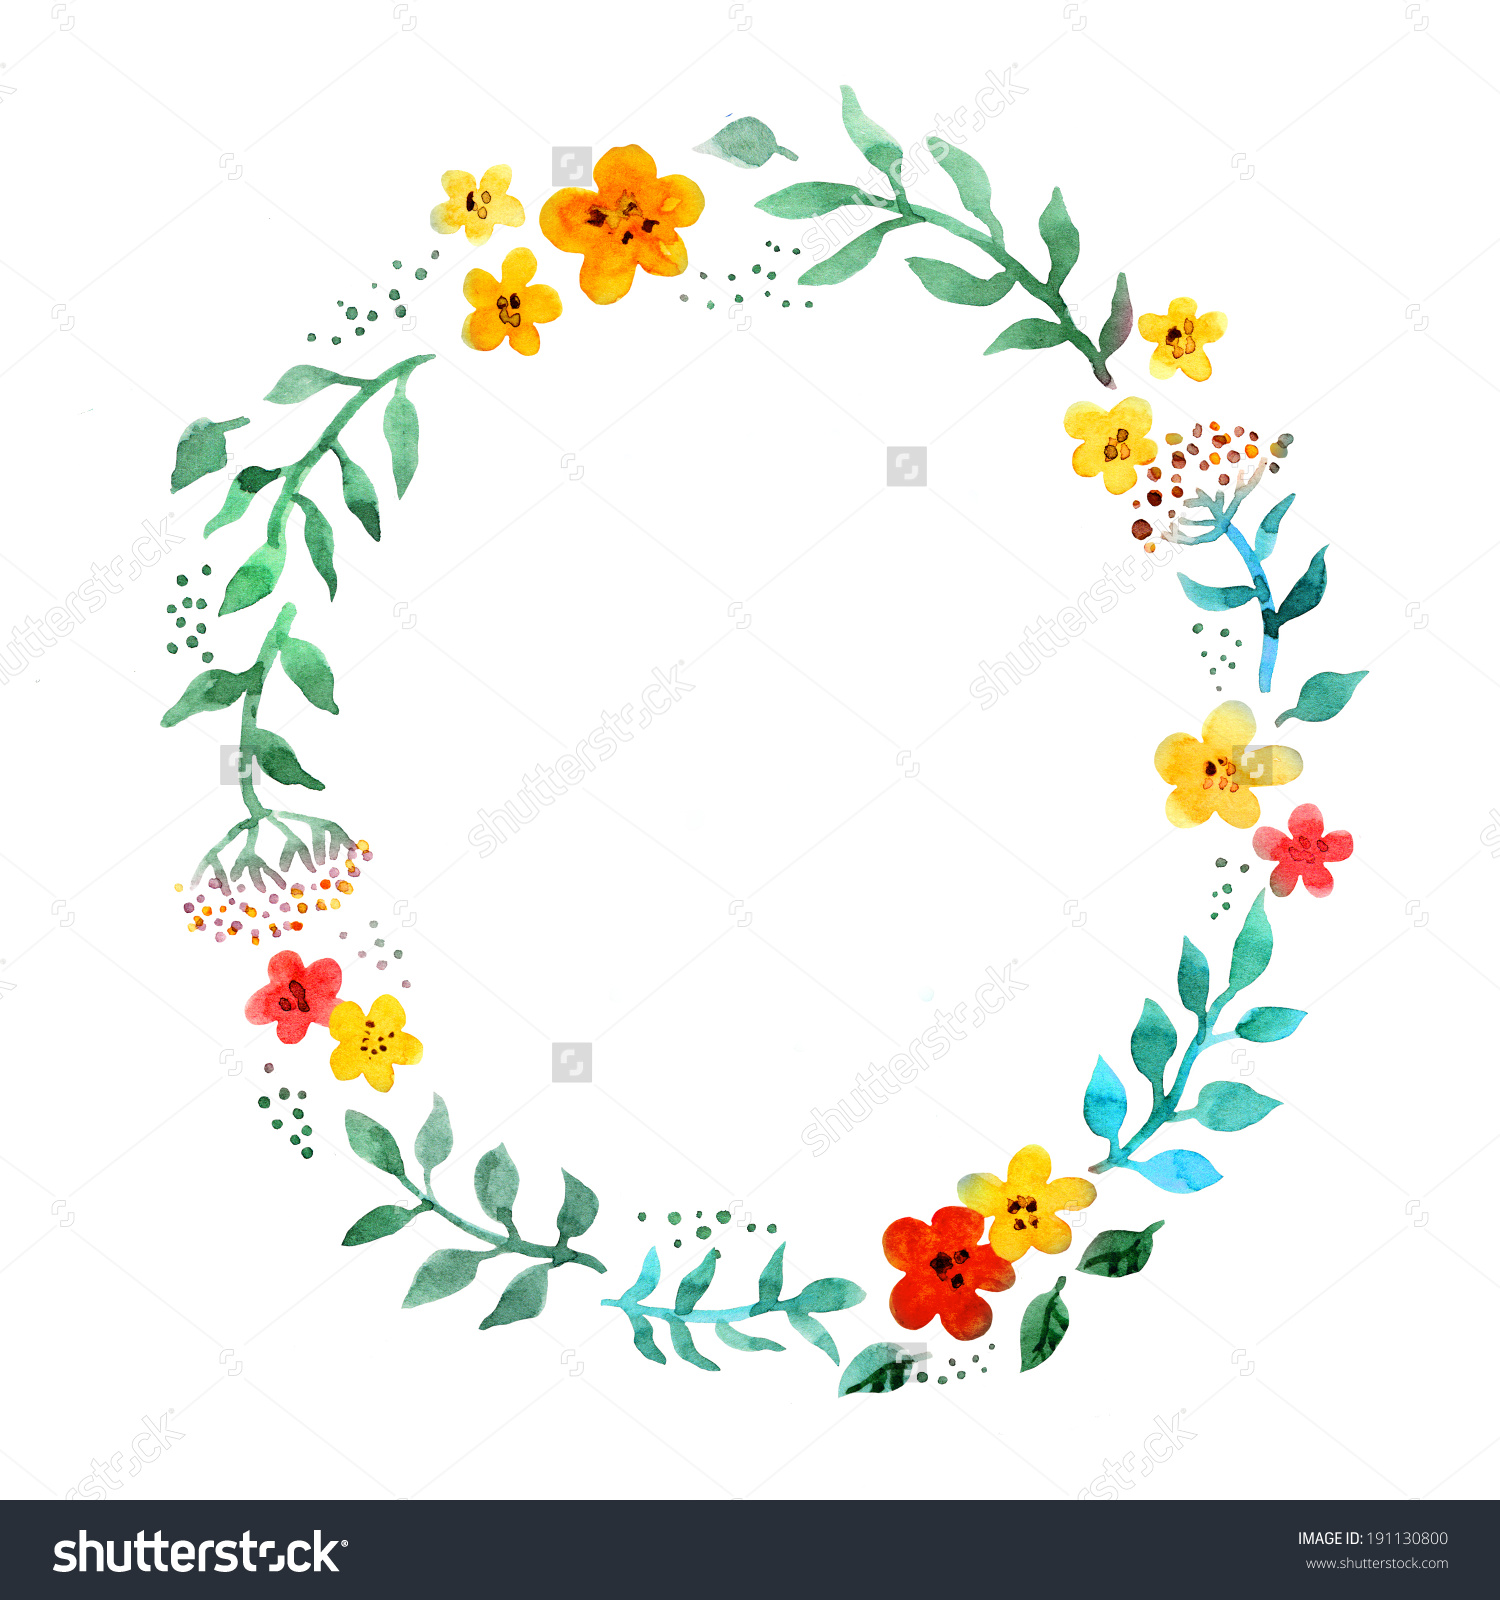 Circle of flowers clip art.